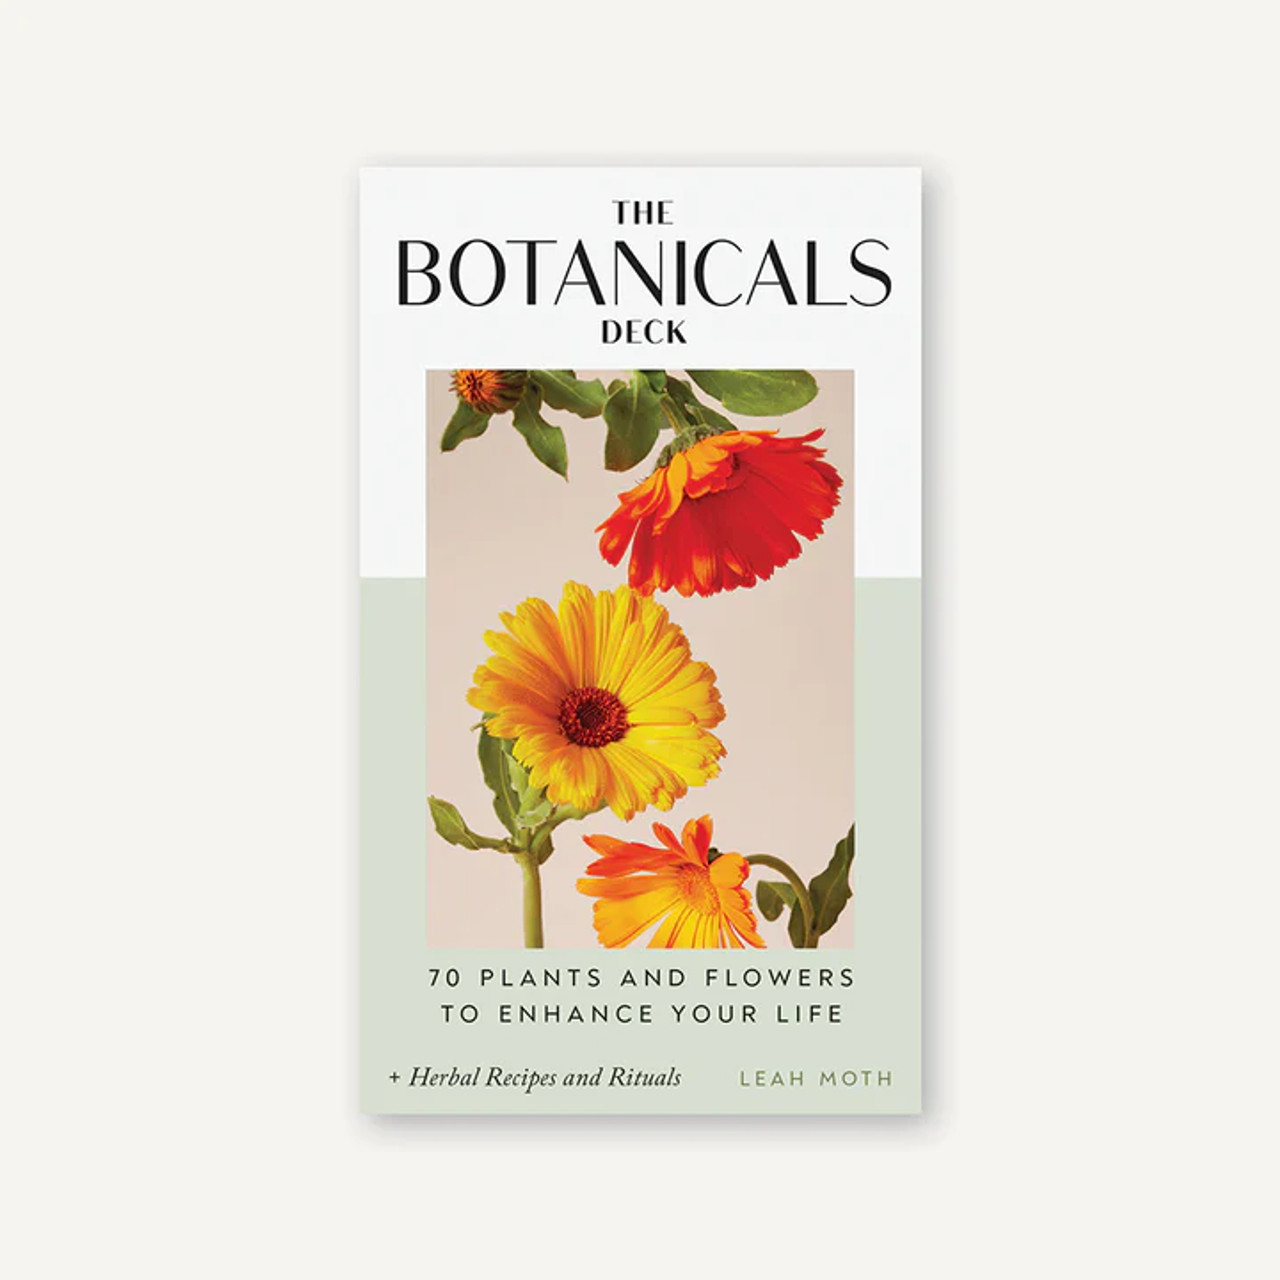 Botanicals Deck 70 Plants and Flowers to Enhance Your Life?Plus Herbal Recipes and Rituals BY LEAH MOTH